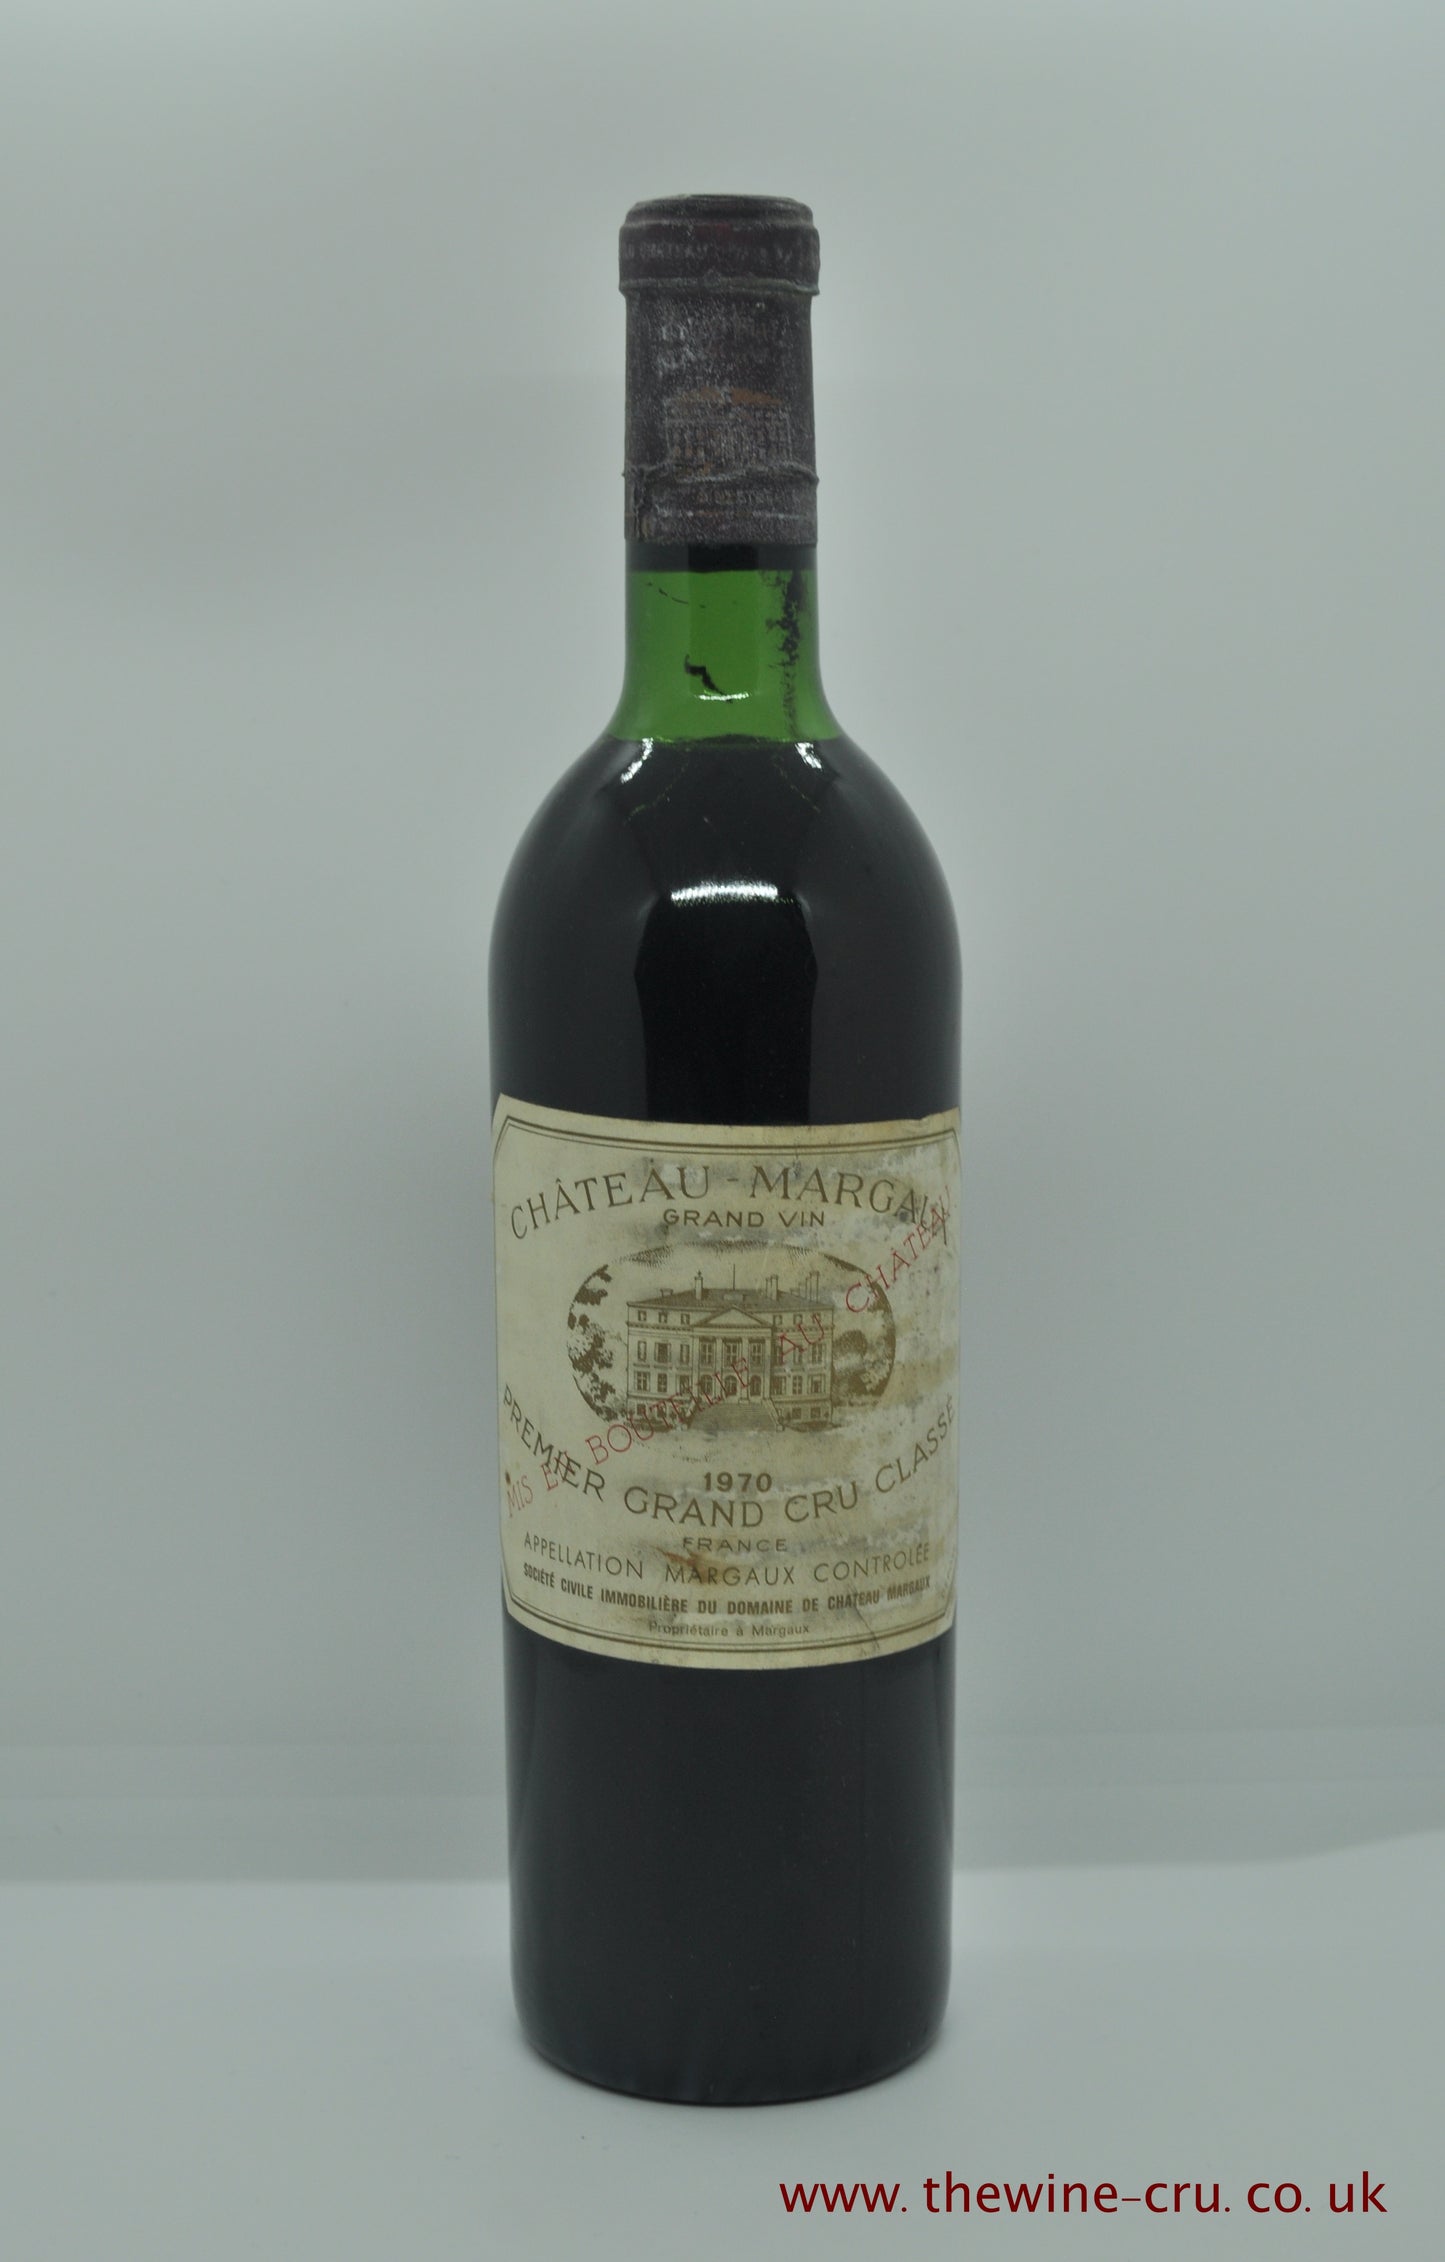 1970 vintage red wine. Chateau Margaux 1970. France, Bordeaux. Immediate delivery UK. Free local delivery.